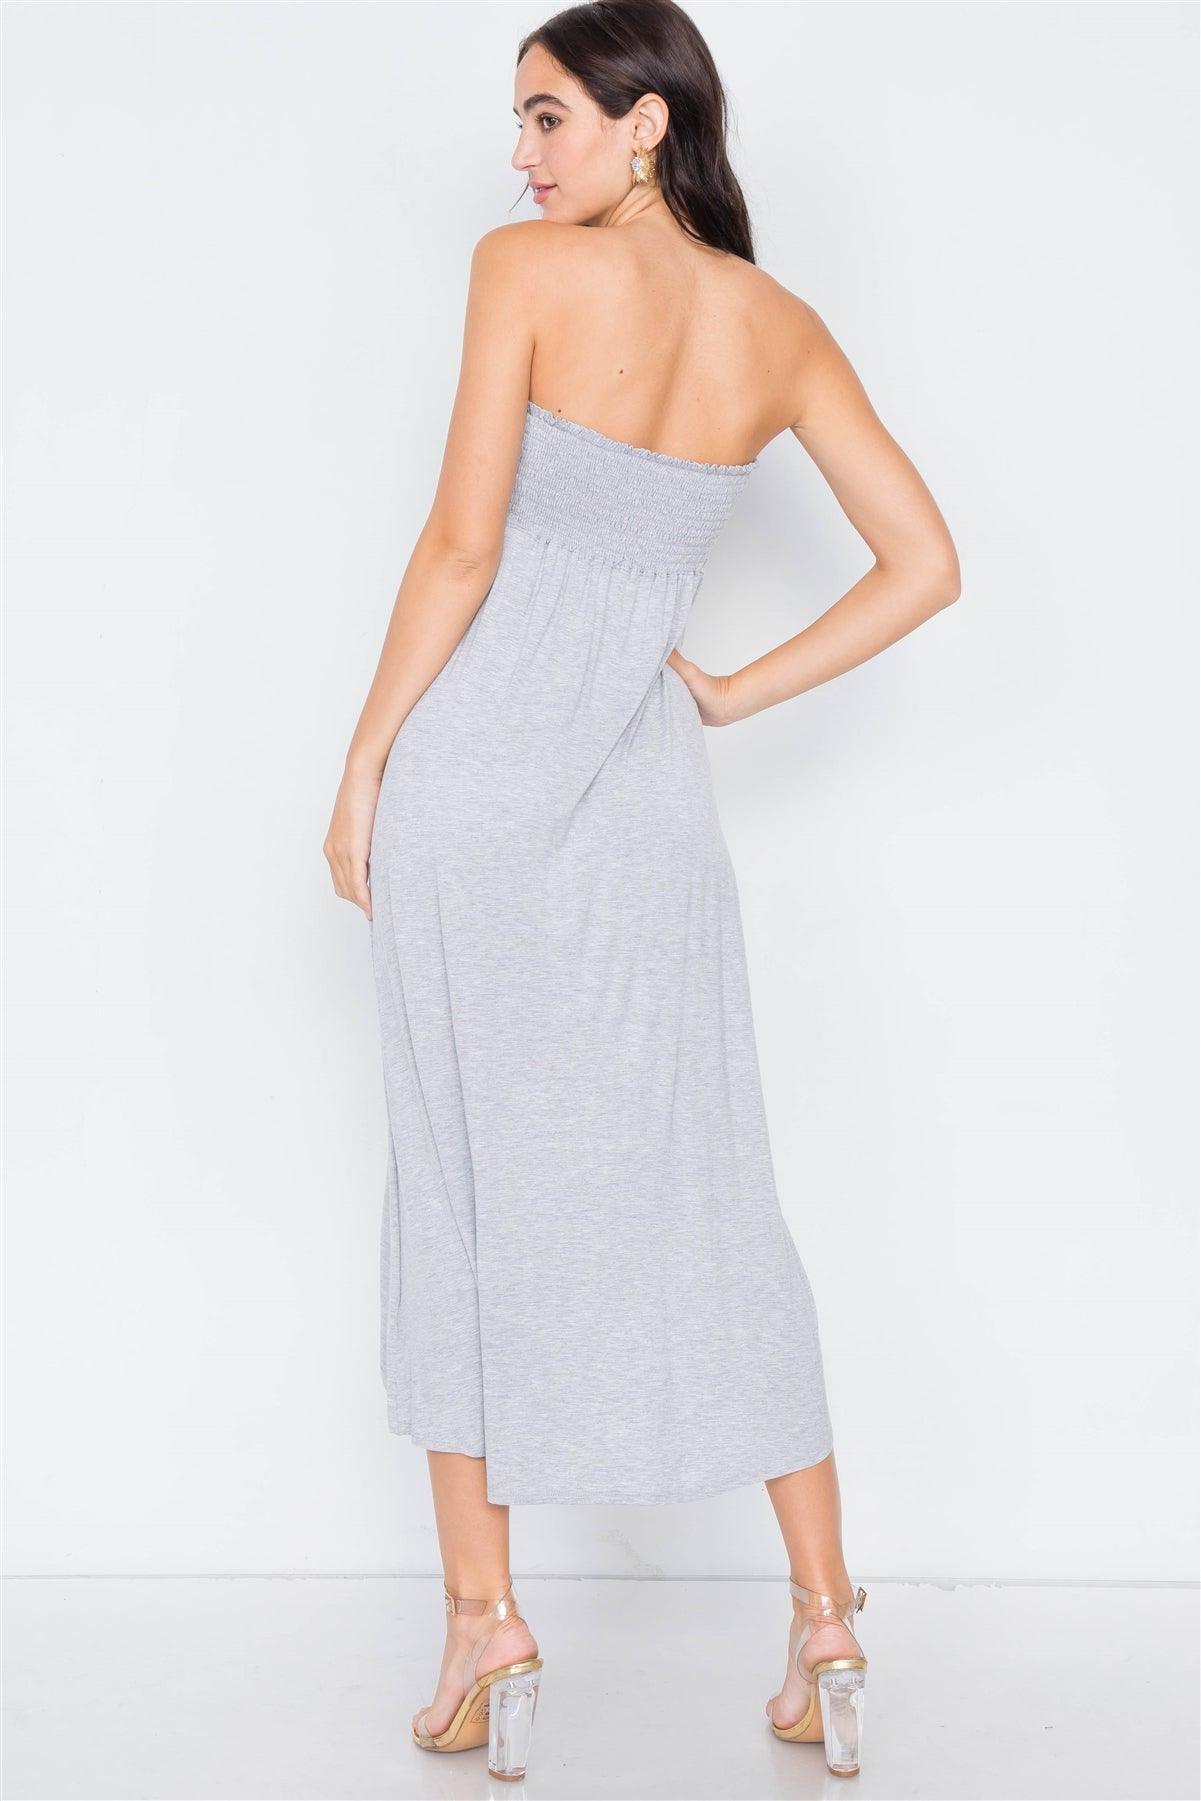 Heather Grey Off-The-Shoulder Ruched Tube Top Midi Dress  /2-2-2